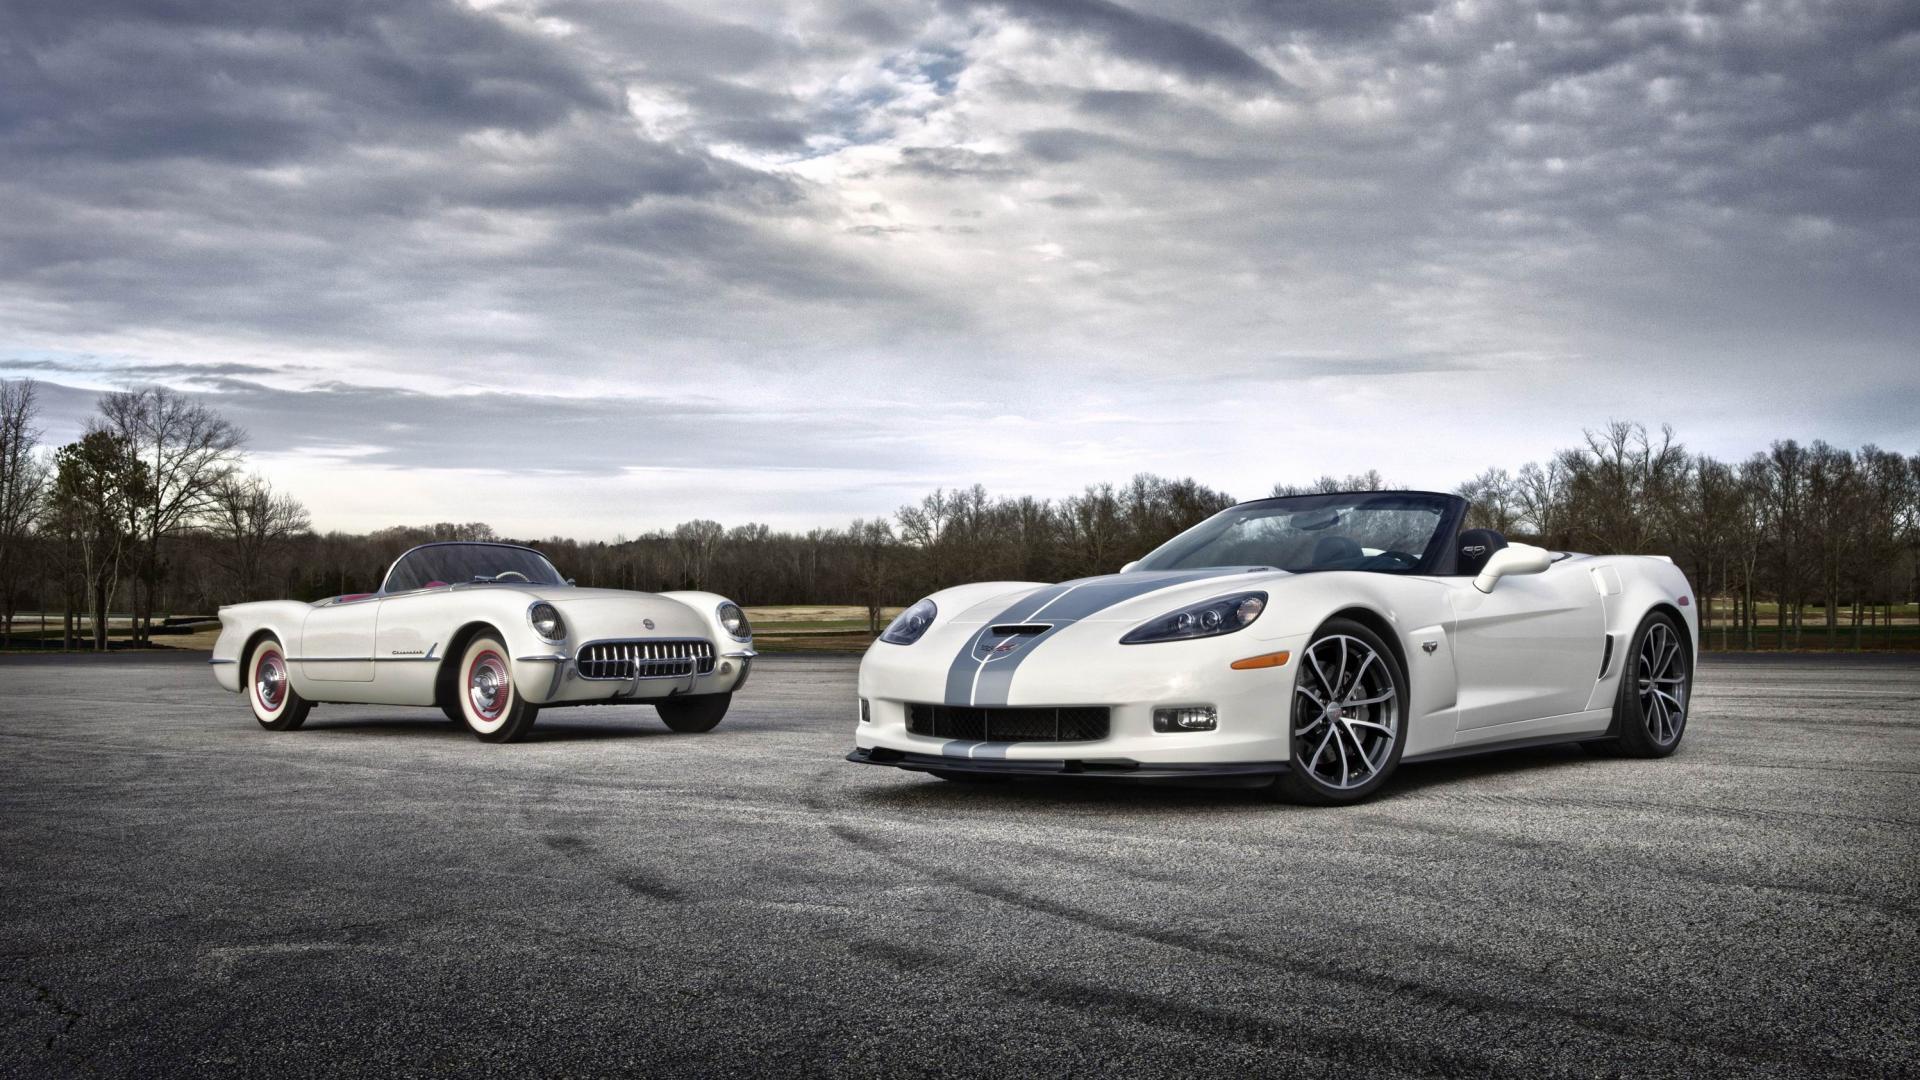 Cars Facebook Covers for Boys 2014 Cover Image for Timeline 2014